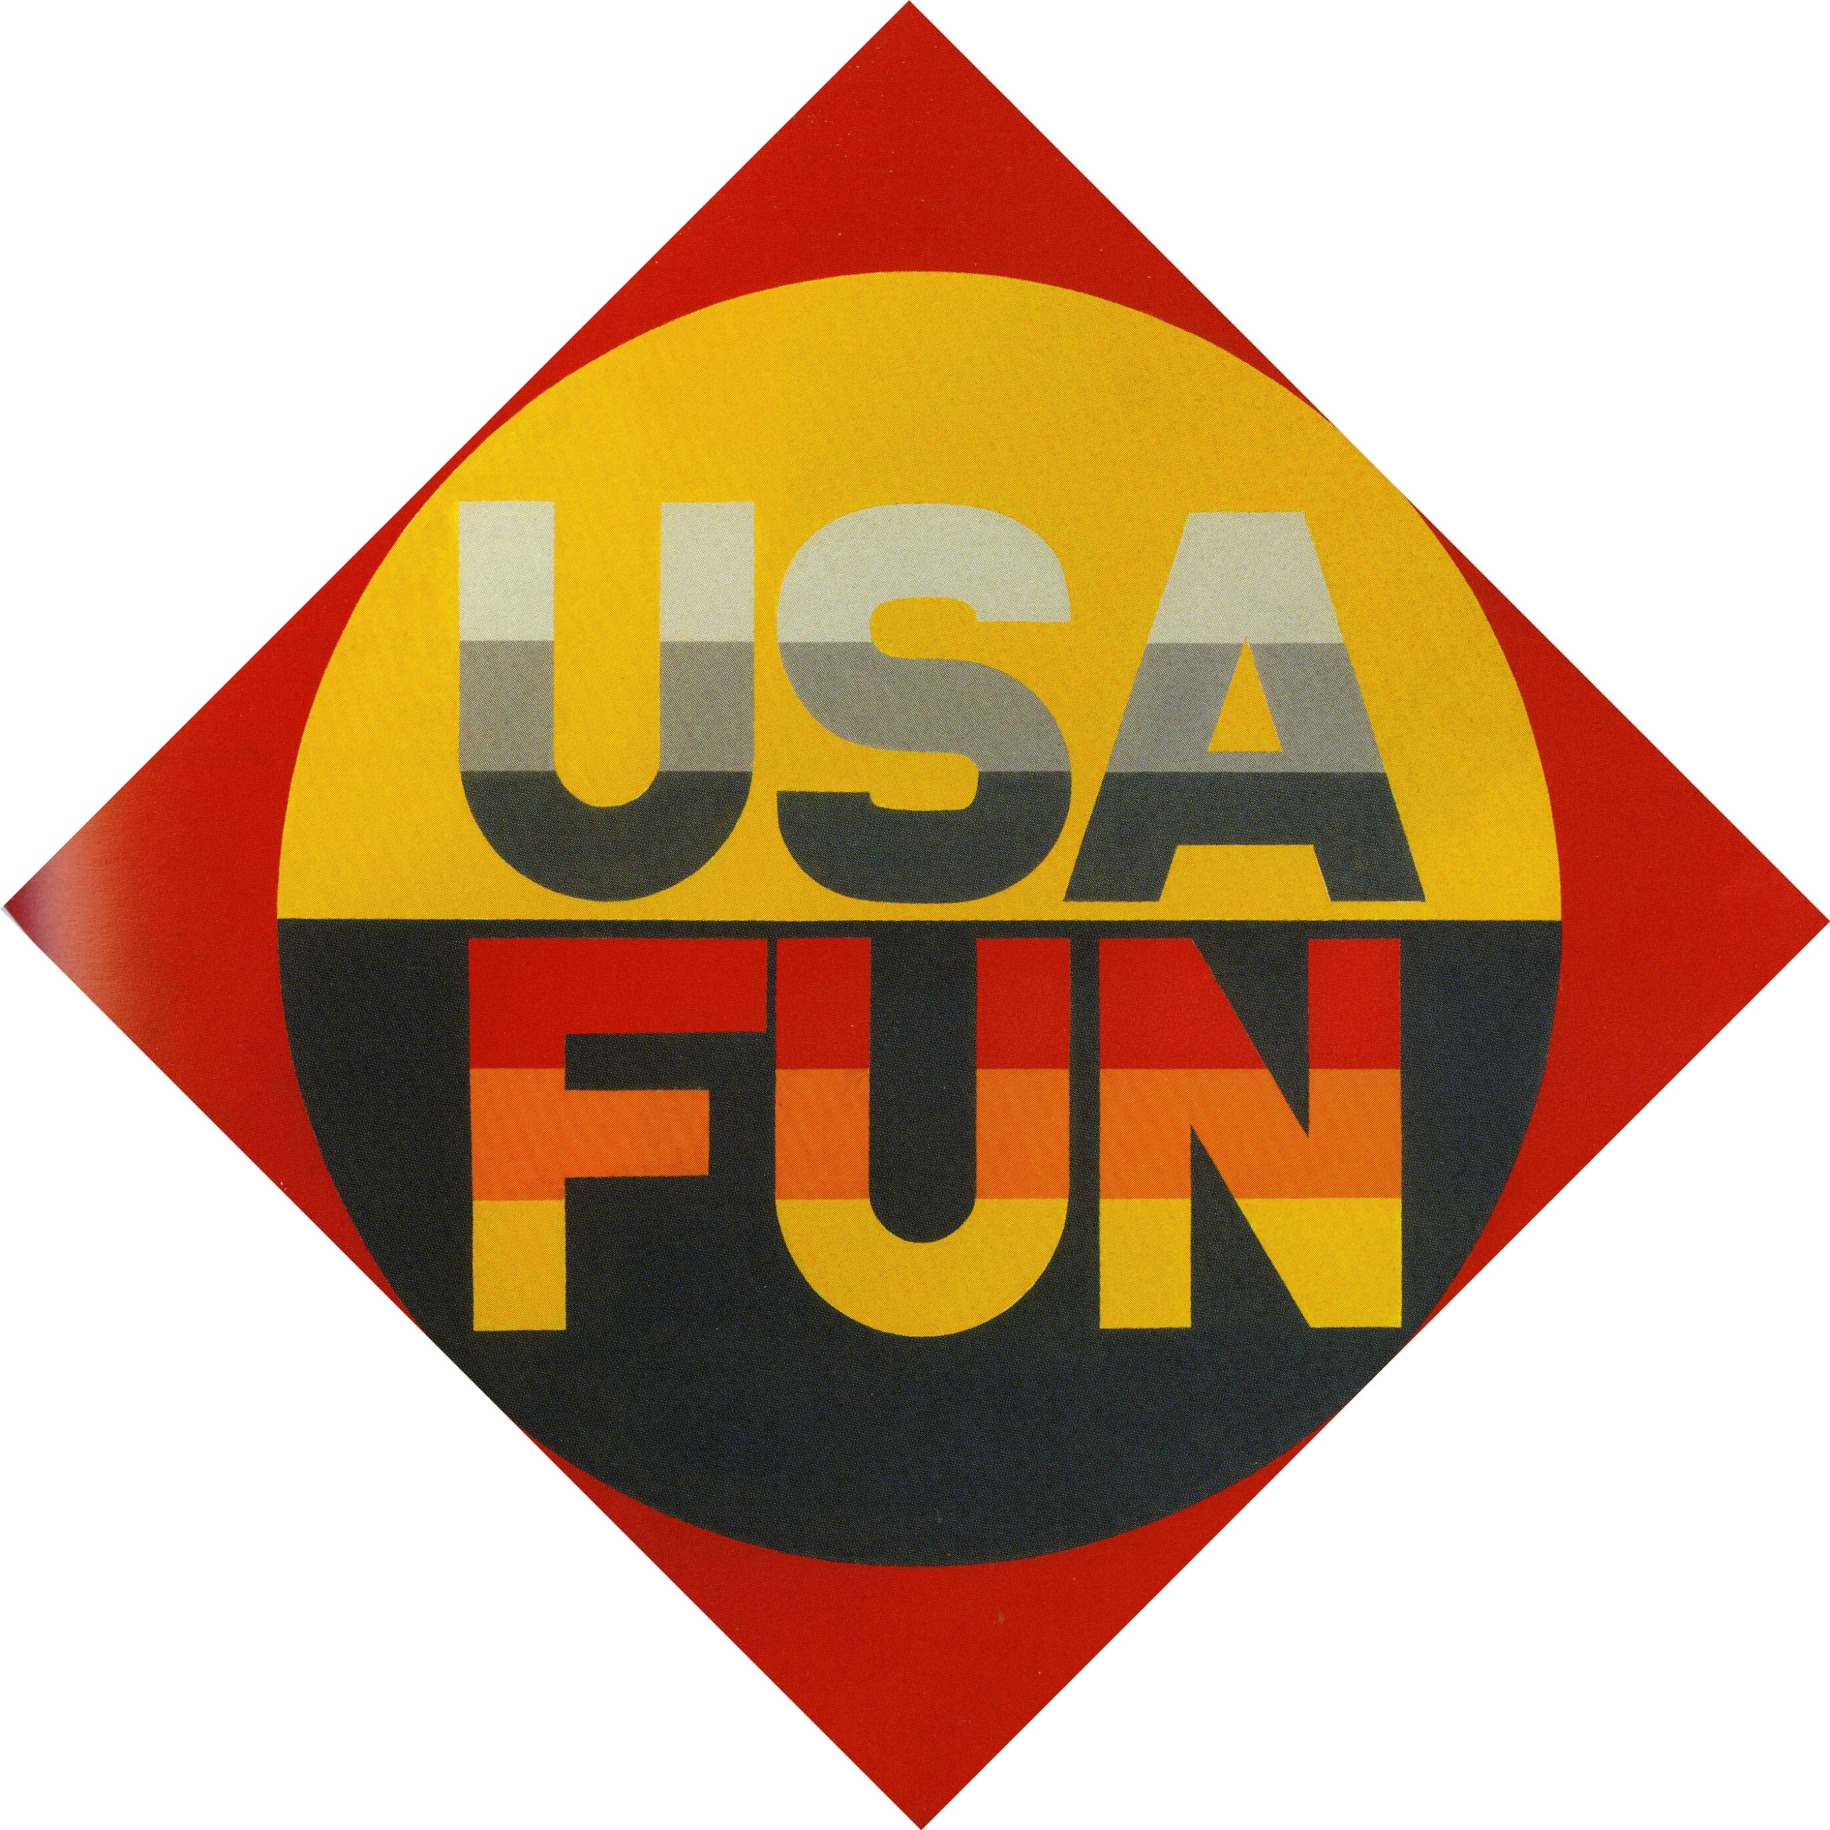 USA Fun, a 51 by 51 inch diamond shaped canvas with a large circle against an orange-red ground. The top half of the circle is yellow, with the text USA; each letter is three shades of gray, from lightest at top to darkest at bottom. The lower half of the circle is black, with the word fun, each letter consisting of a red, orange, and yellow stripes.